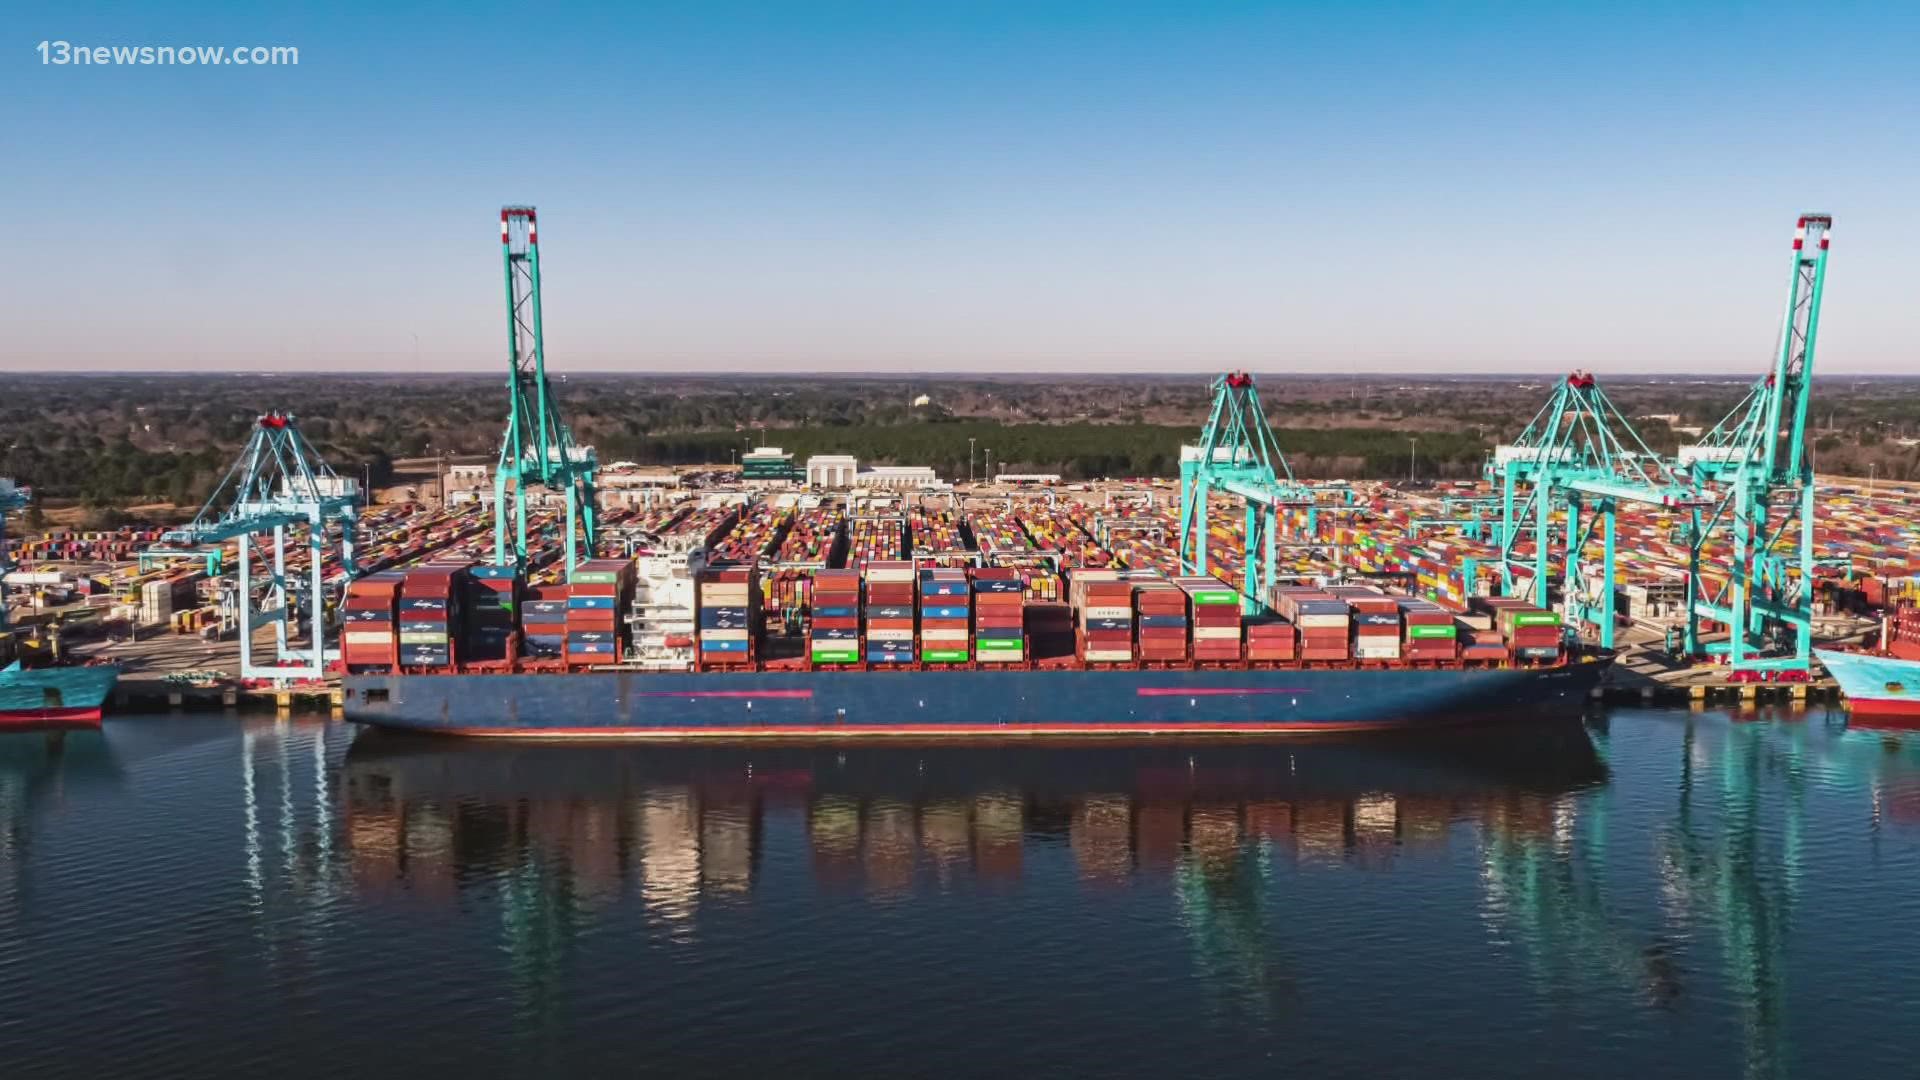 When complete, the inner harbor shipping channel will go from 50 to 55 feet deep.